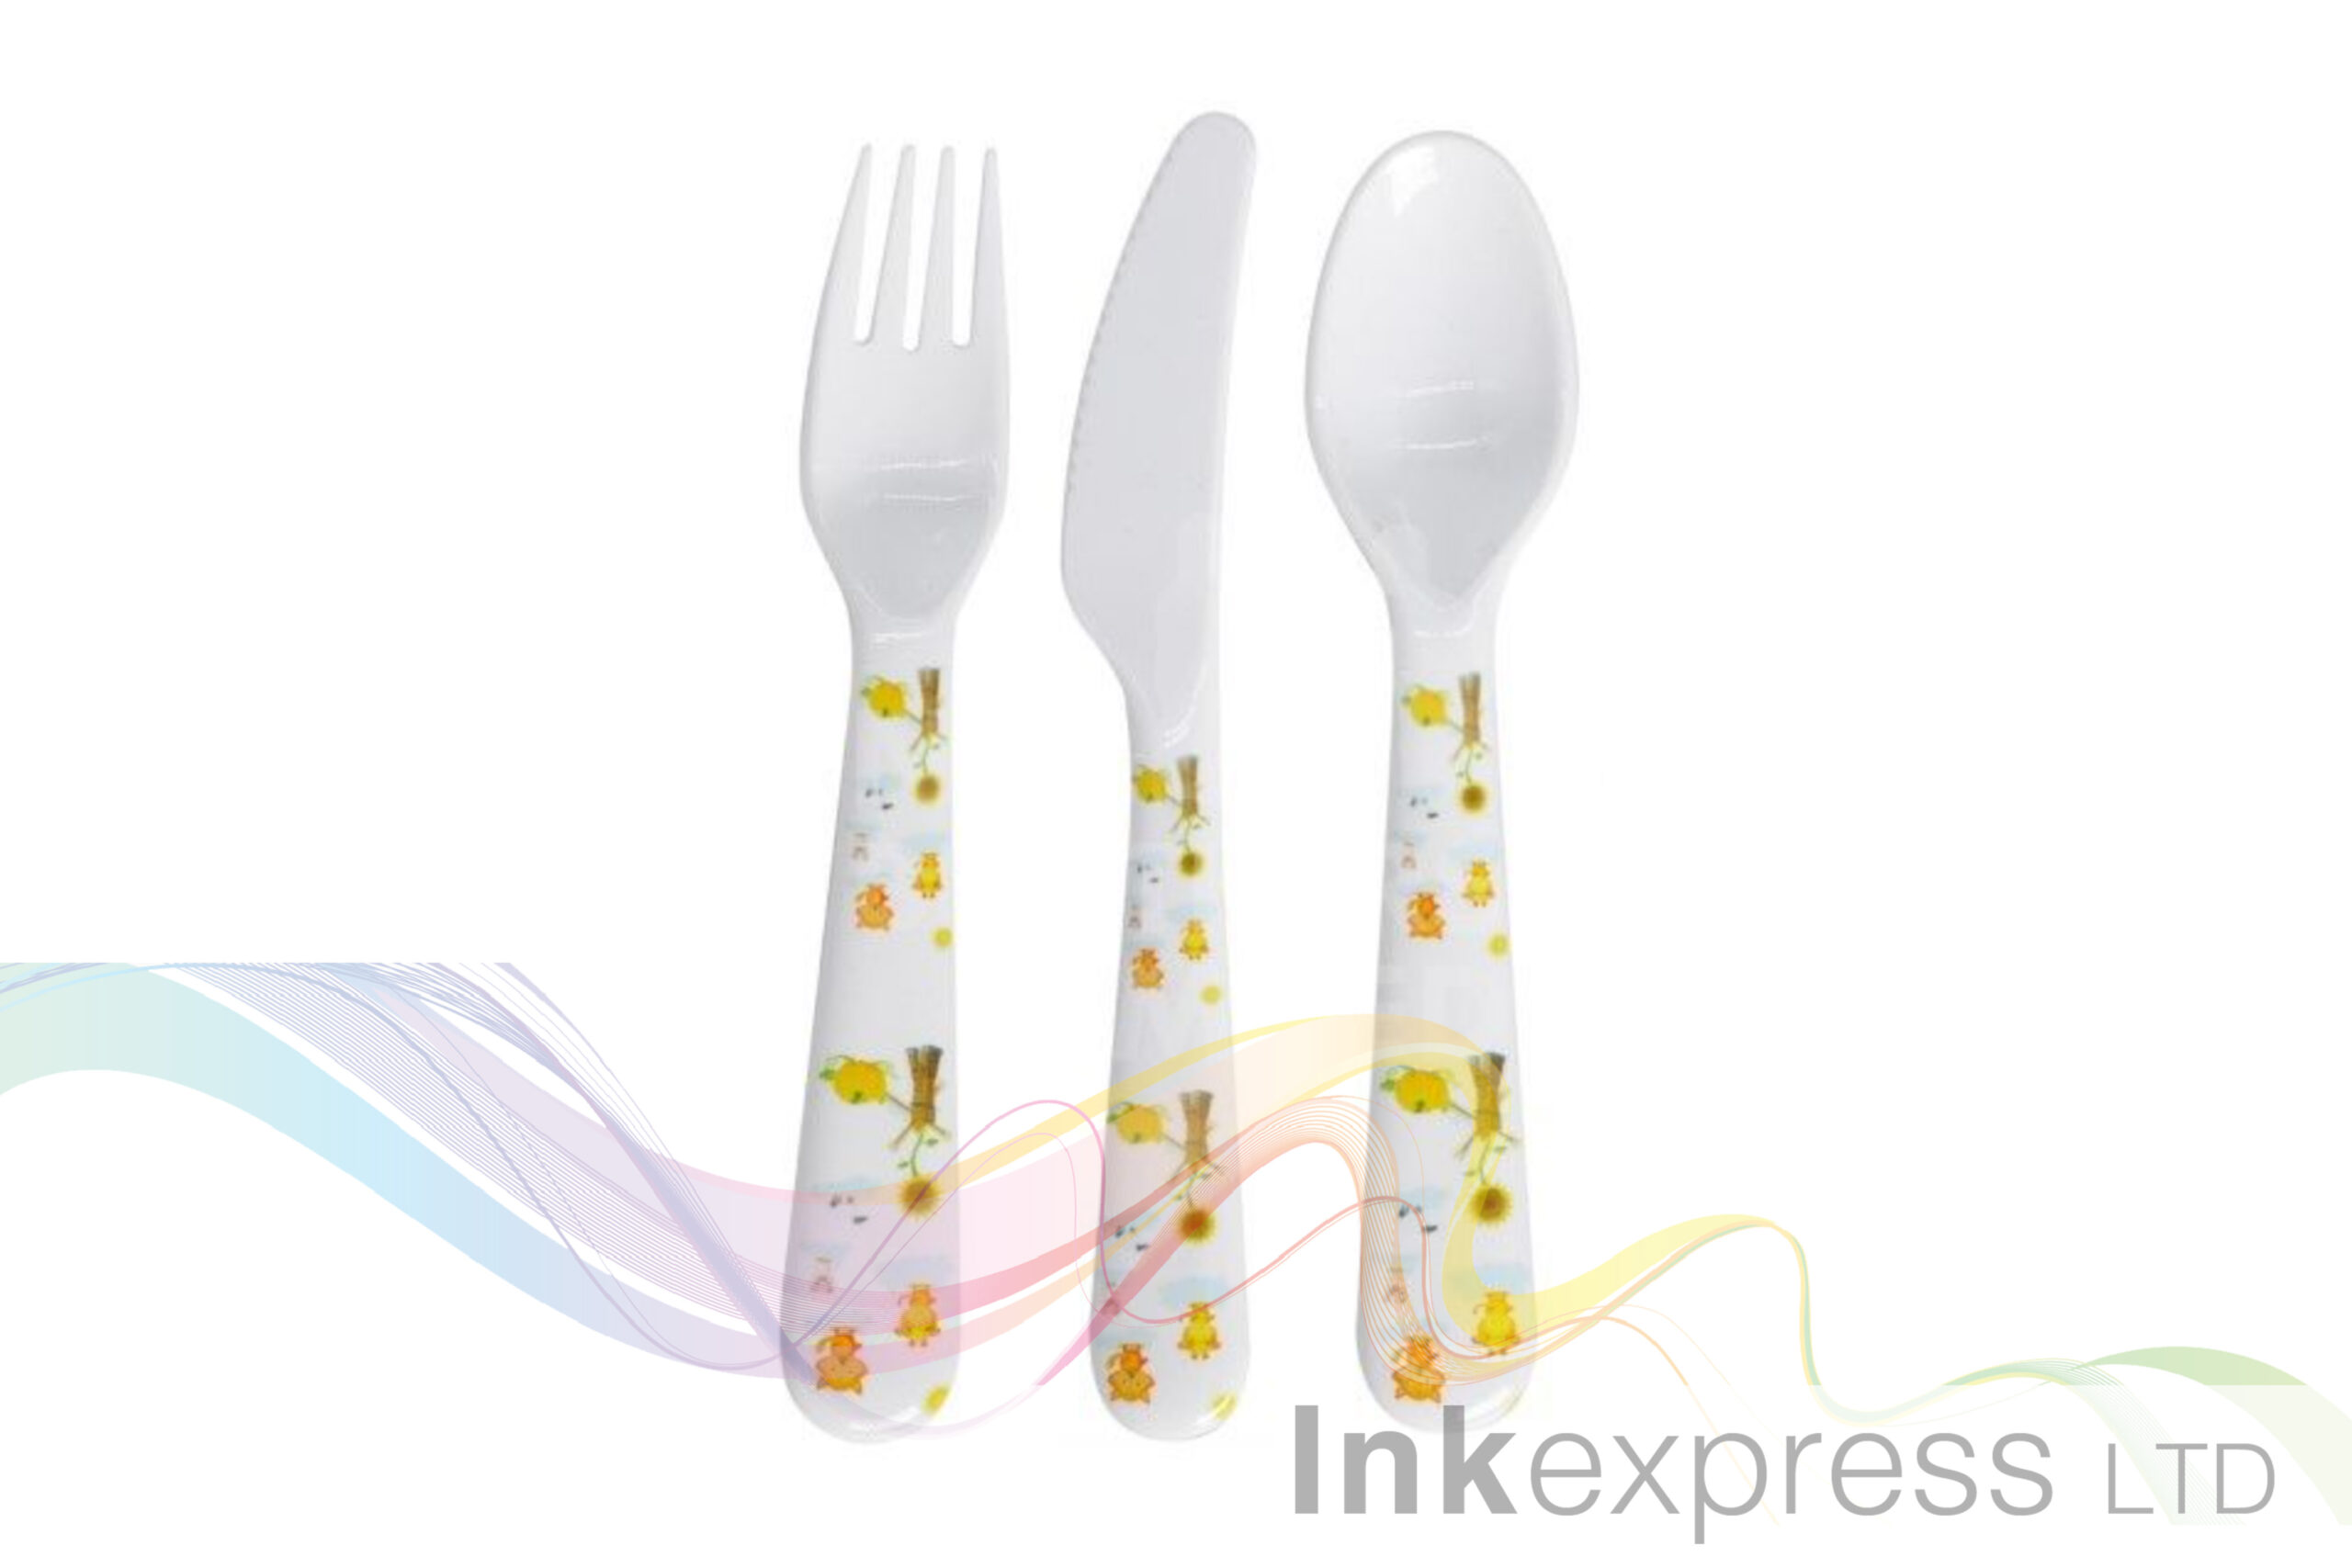 Details about   10 X Kids Cutlery Blank Sublimation Stainless Steel Polymer Set UK Jsubs 